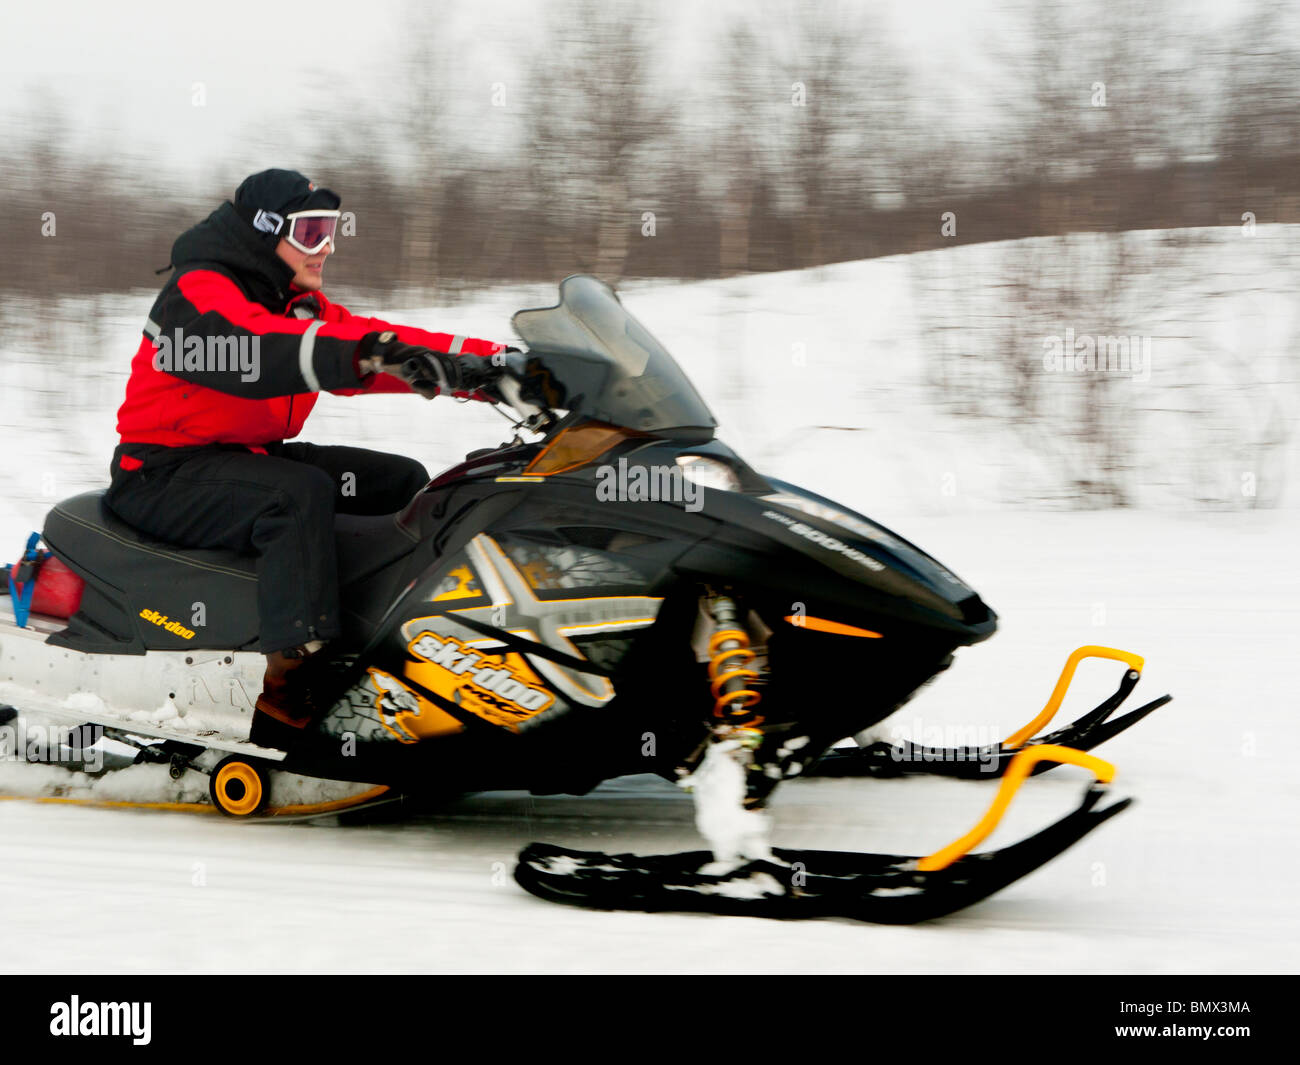 A young man drives a snow mobile through the snow at Kiruna, Lapland, Northern Sweden. Stock Photo